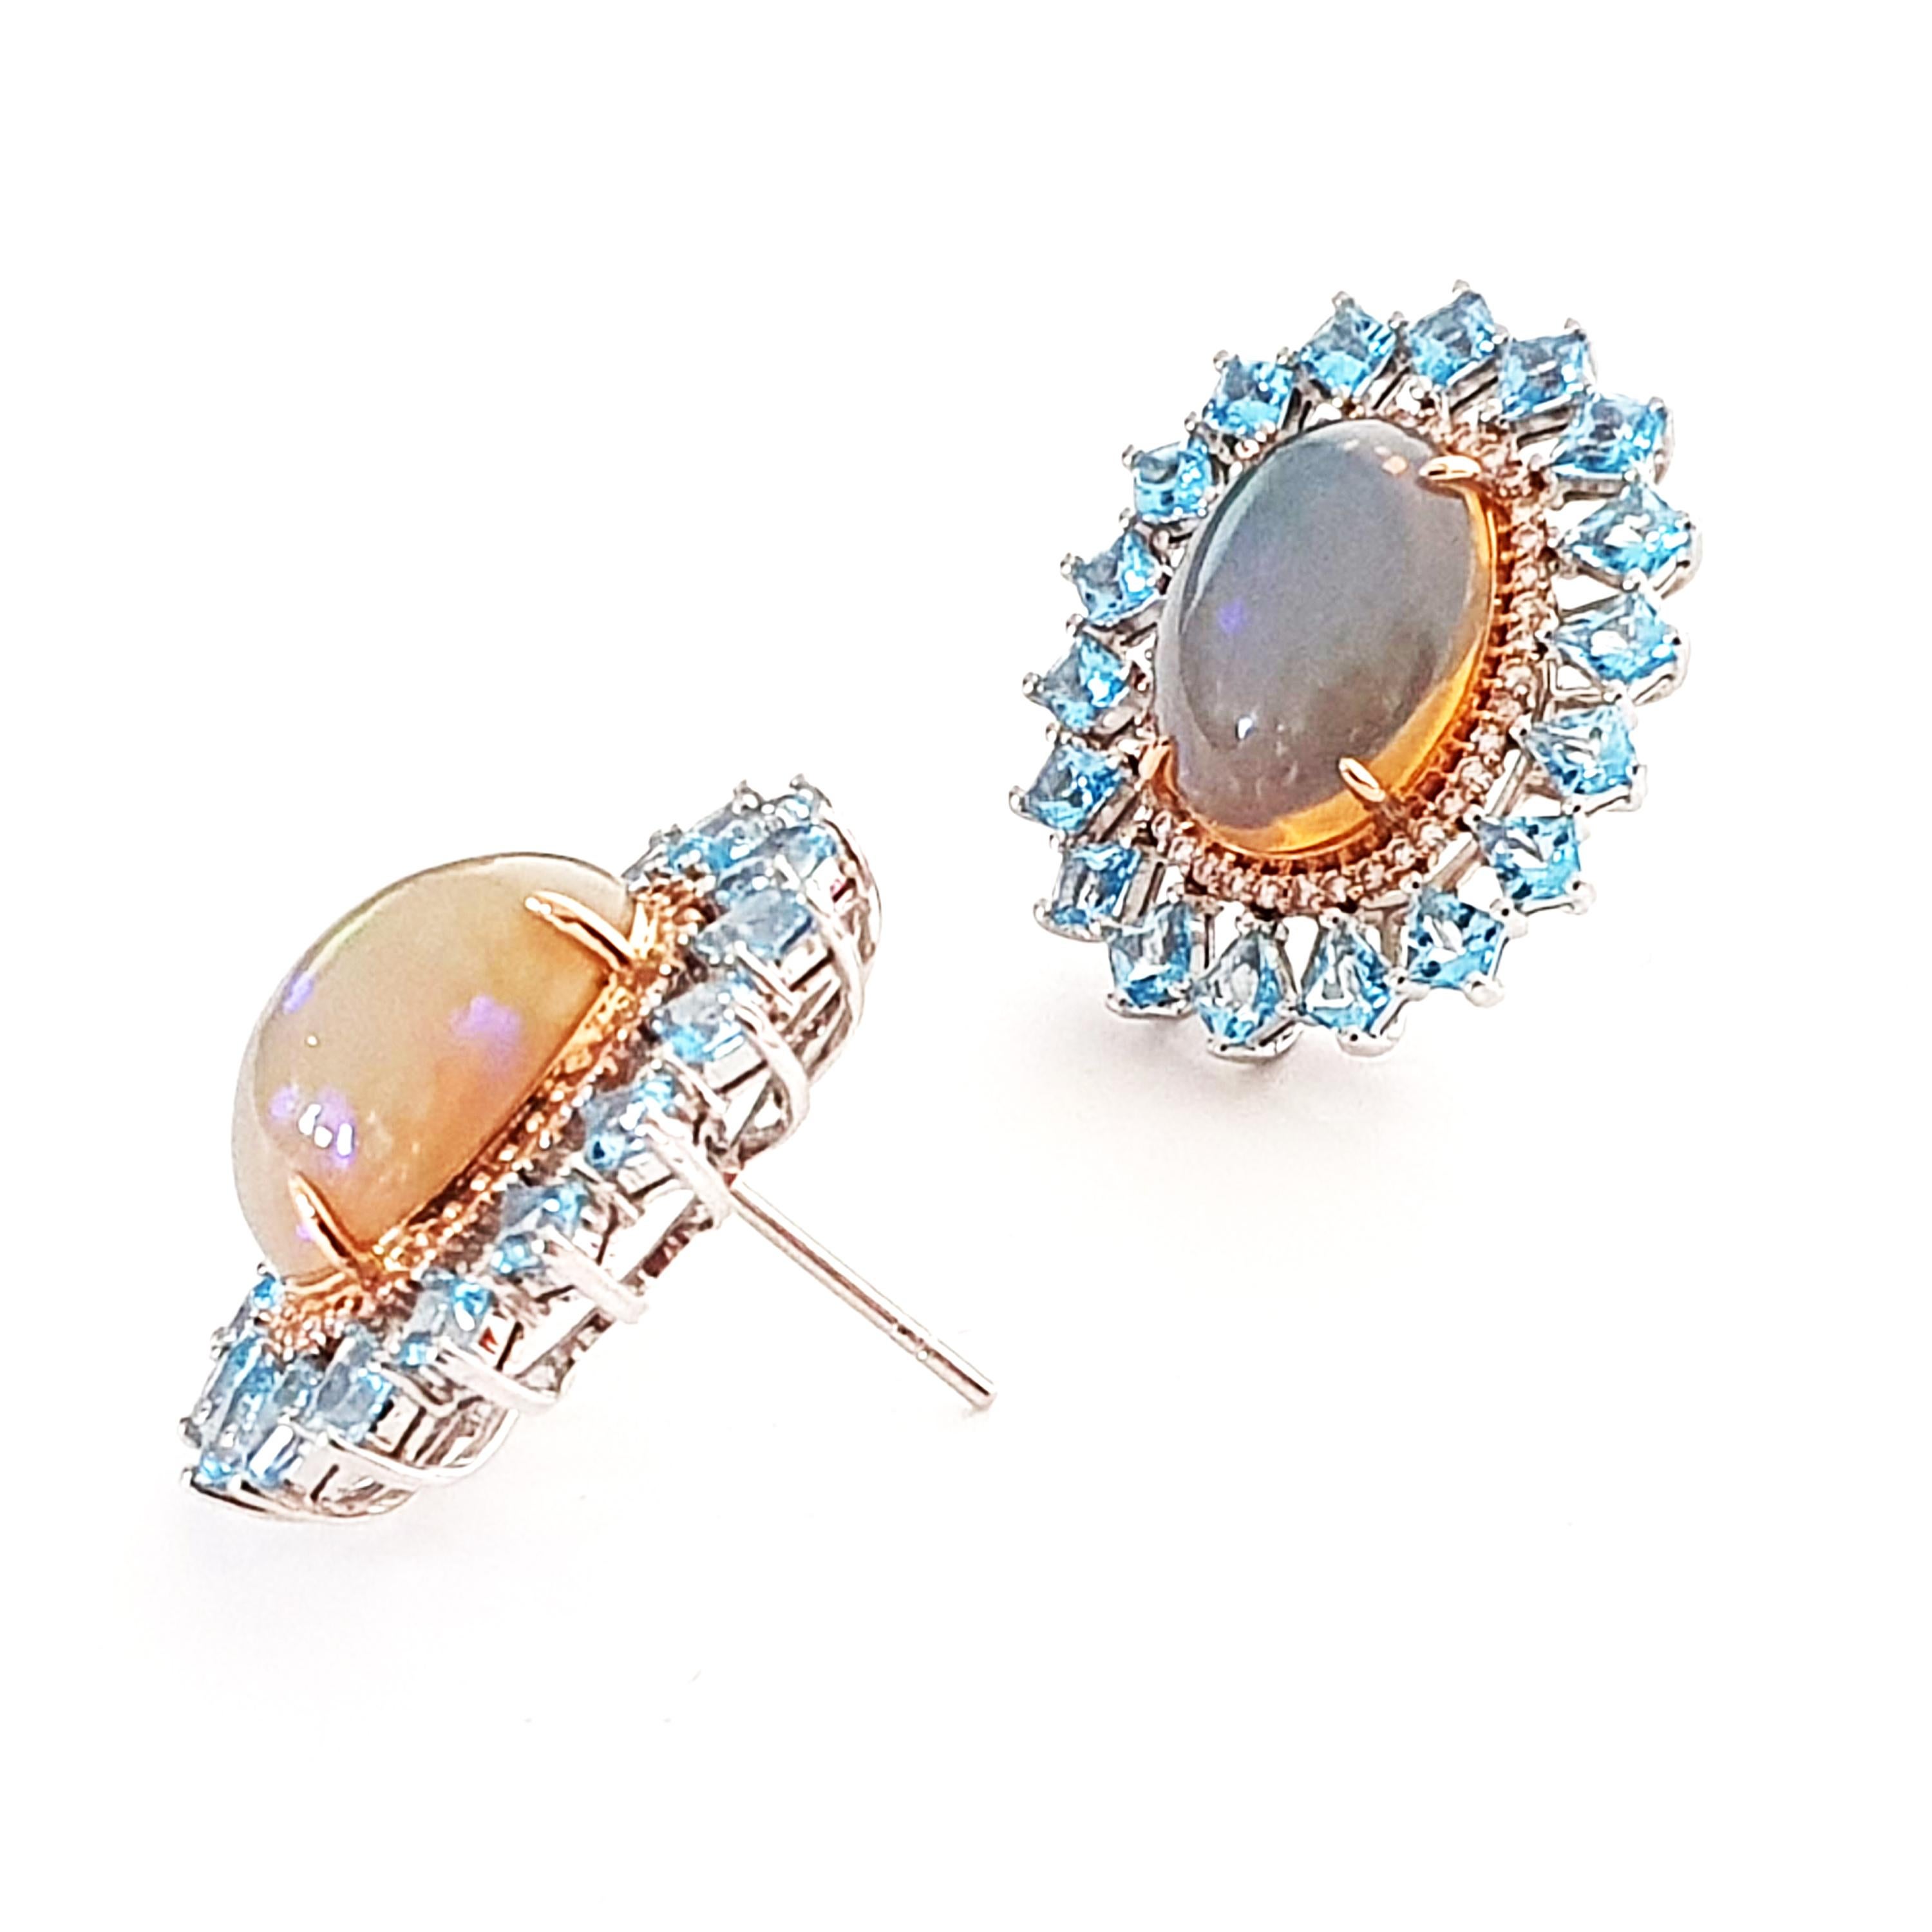 Description:
Stunning one-of-a-king two-tone gold stud earrings. Features opals with a total weight of 7.56ct, bordered with diamonds totalling 0.38ct and topaz totalling 4.00ct in 18ct white gold. The opal is set in accents of rose gold plate.
-